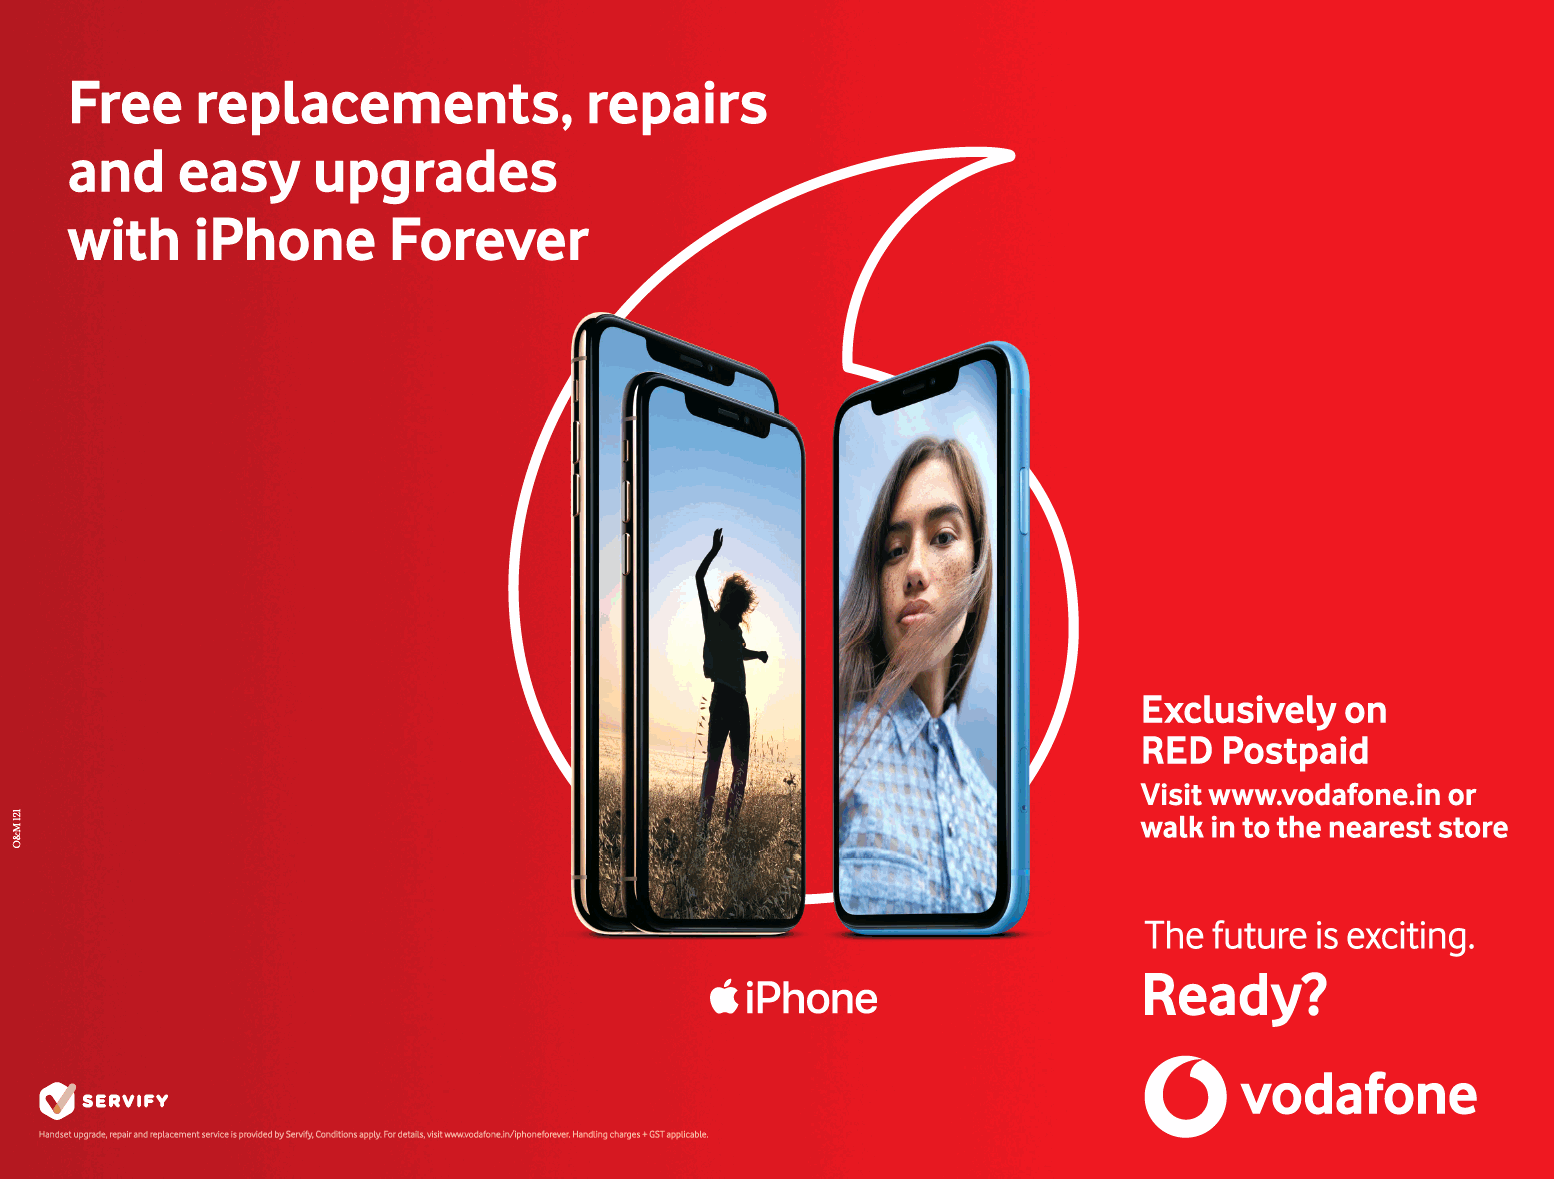 vodafone-exclusively-on-red-post-paid-free-replacements-repairs-ad-delhi-times-11-06-2019.png